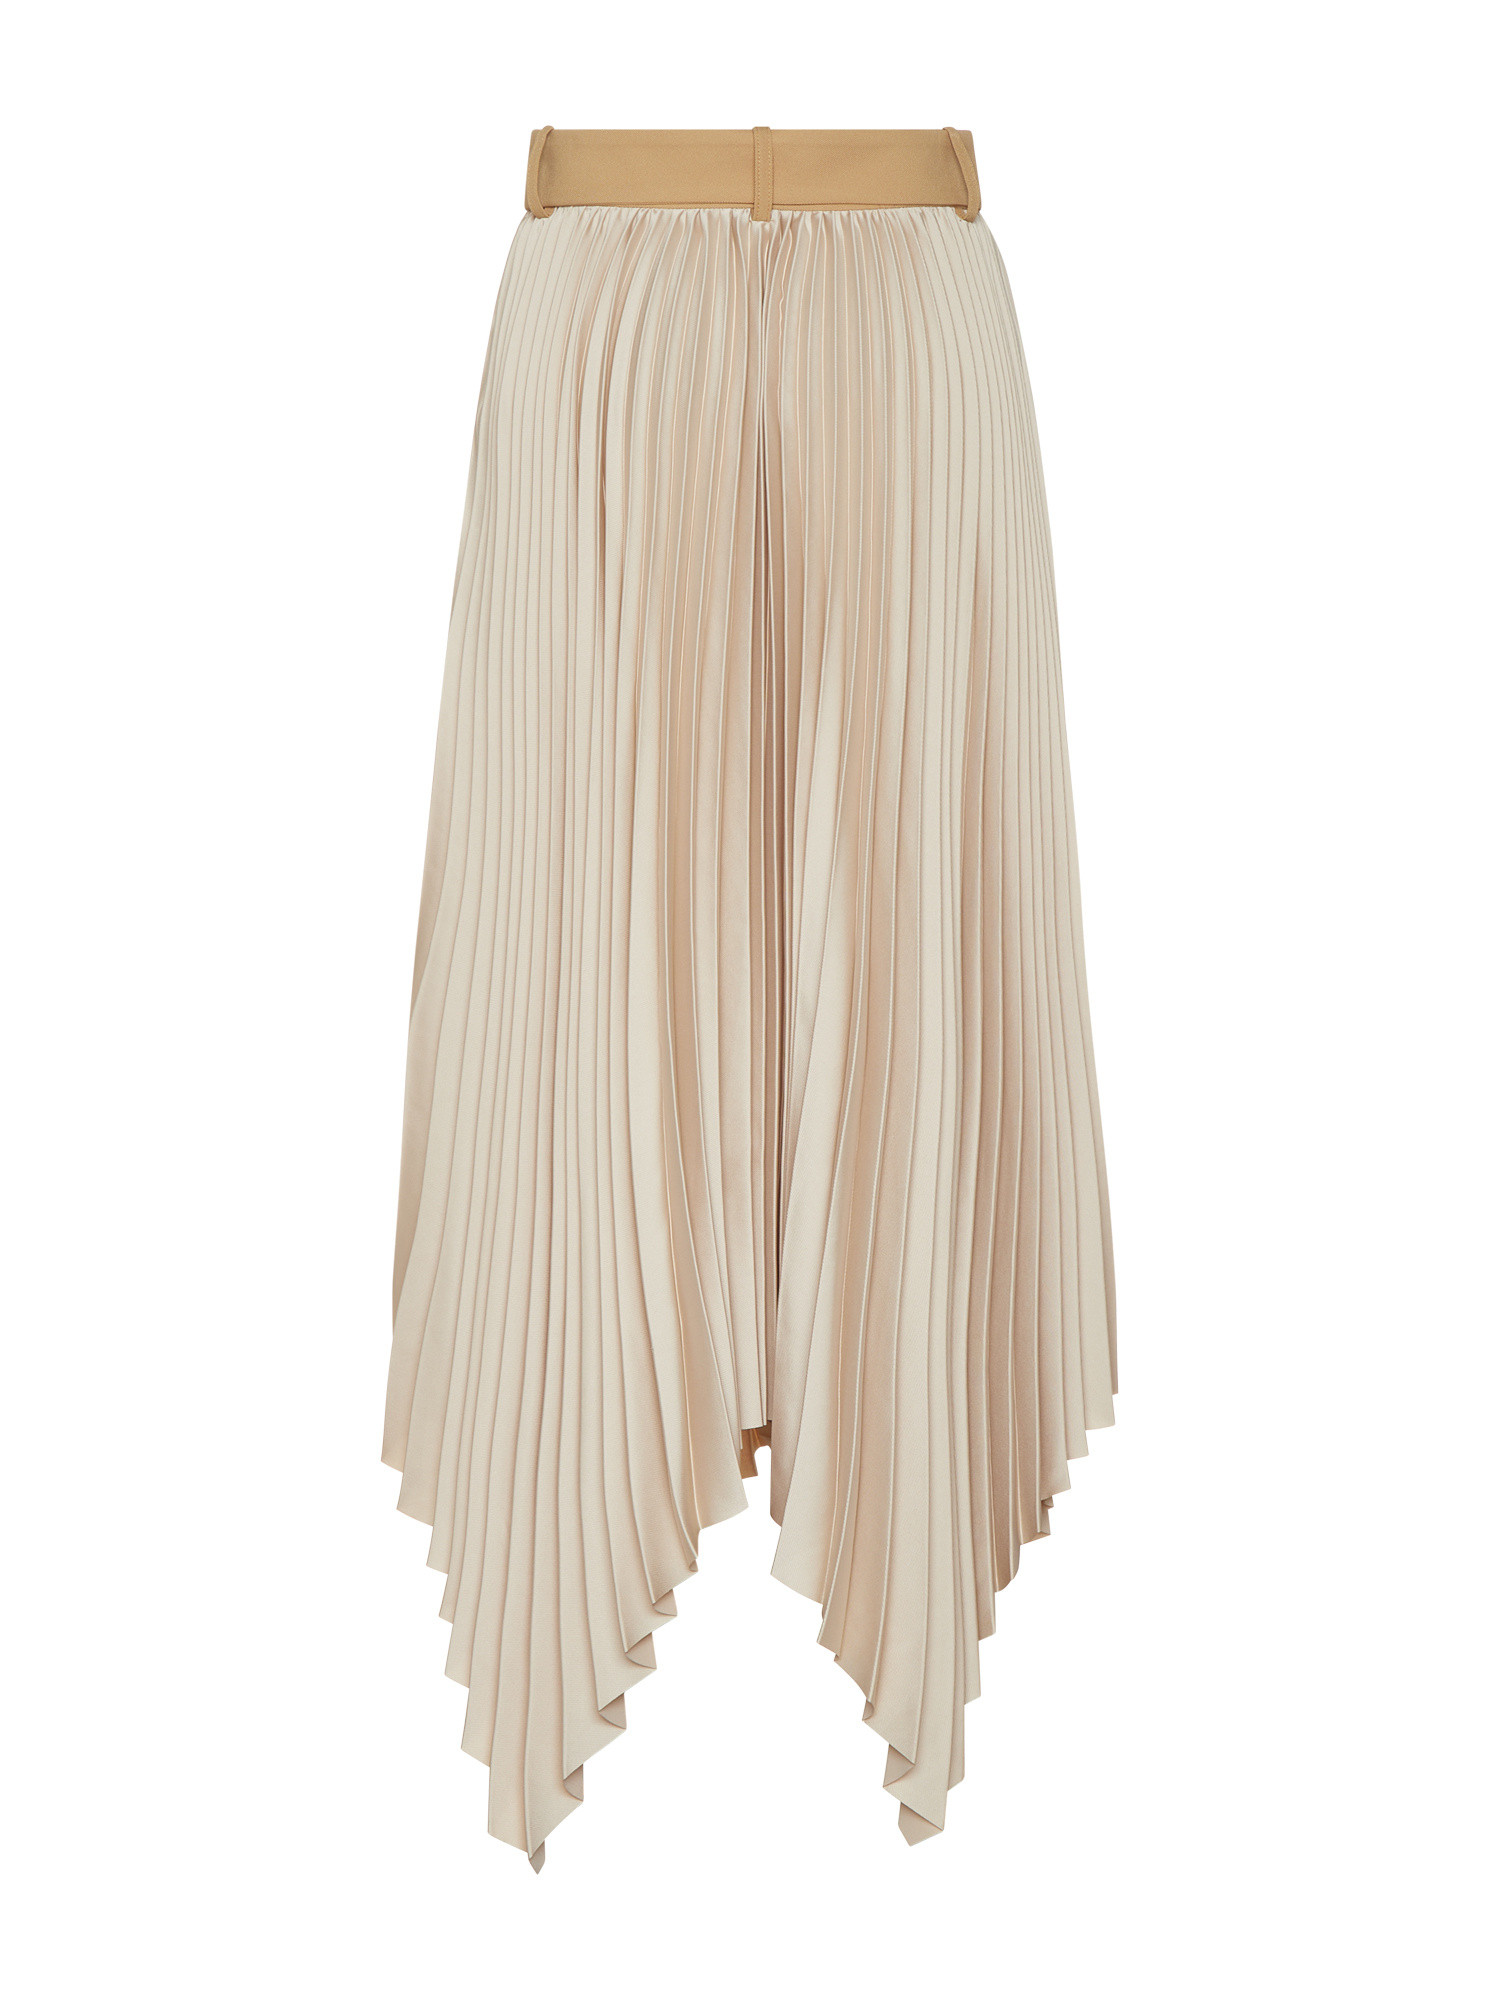 Guess - Asymmetric pleated skirt, Cream, large image number 1